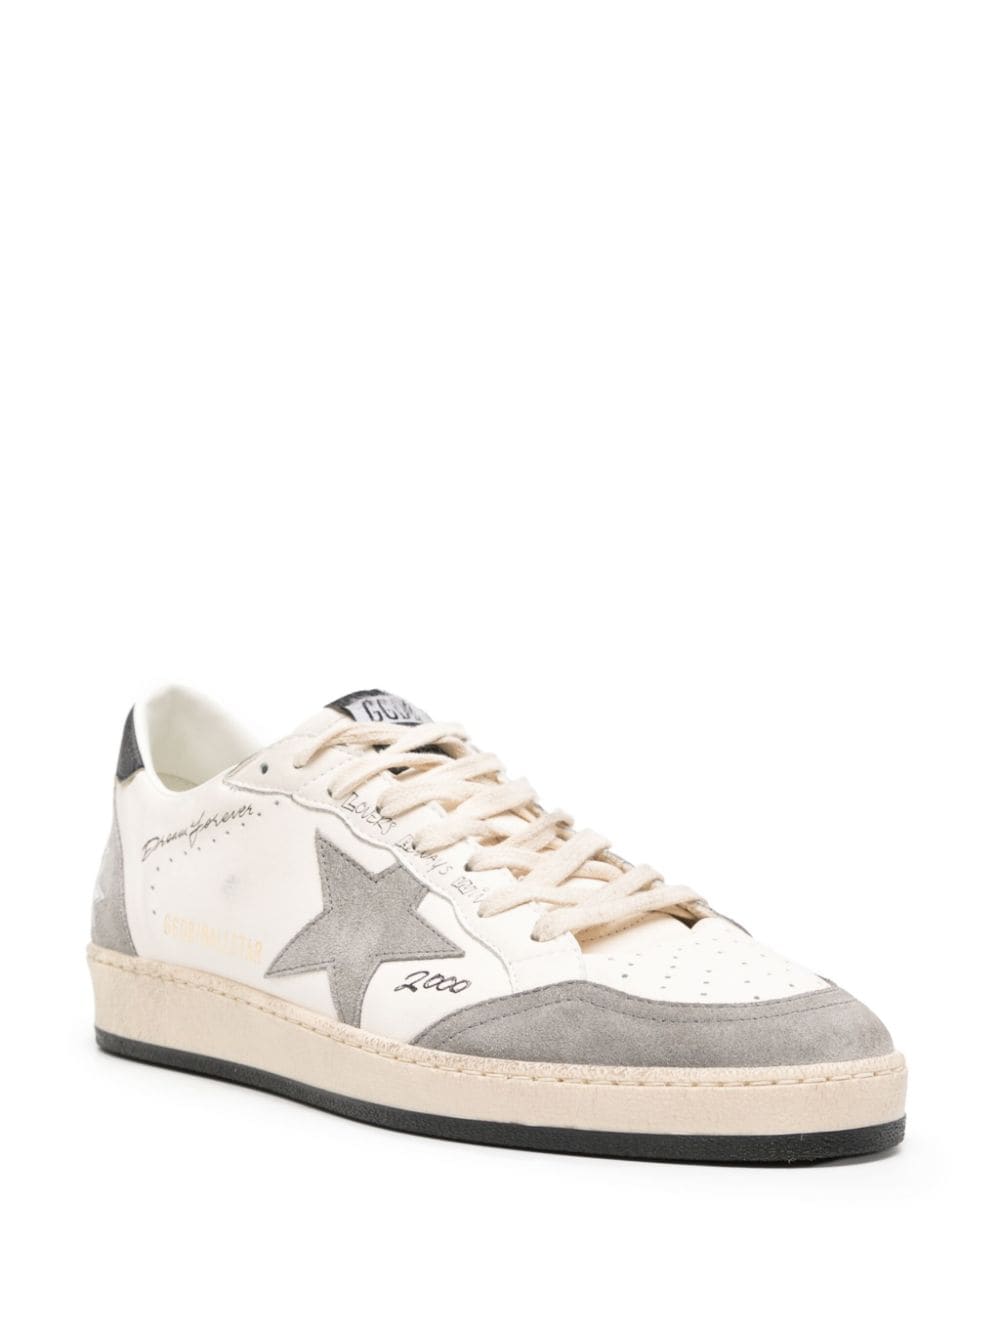 GOLDEN GOOSE Men's Vintage White Ball-Star Sneakers with Grey Suede Inserts